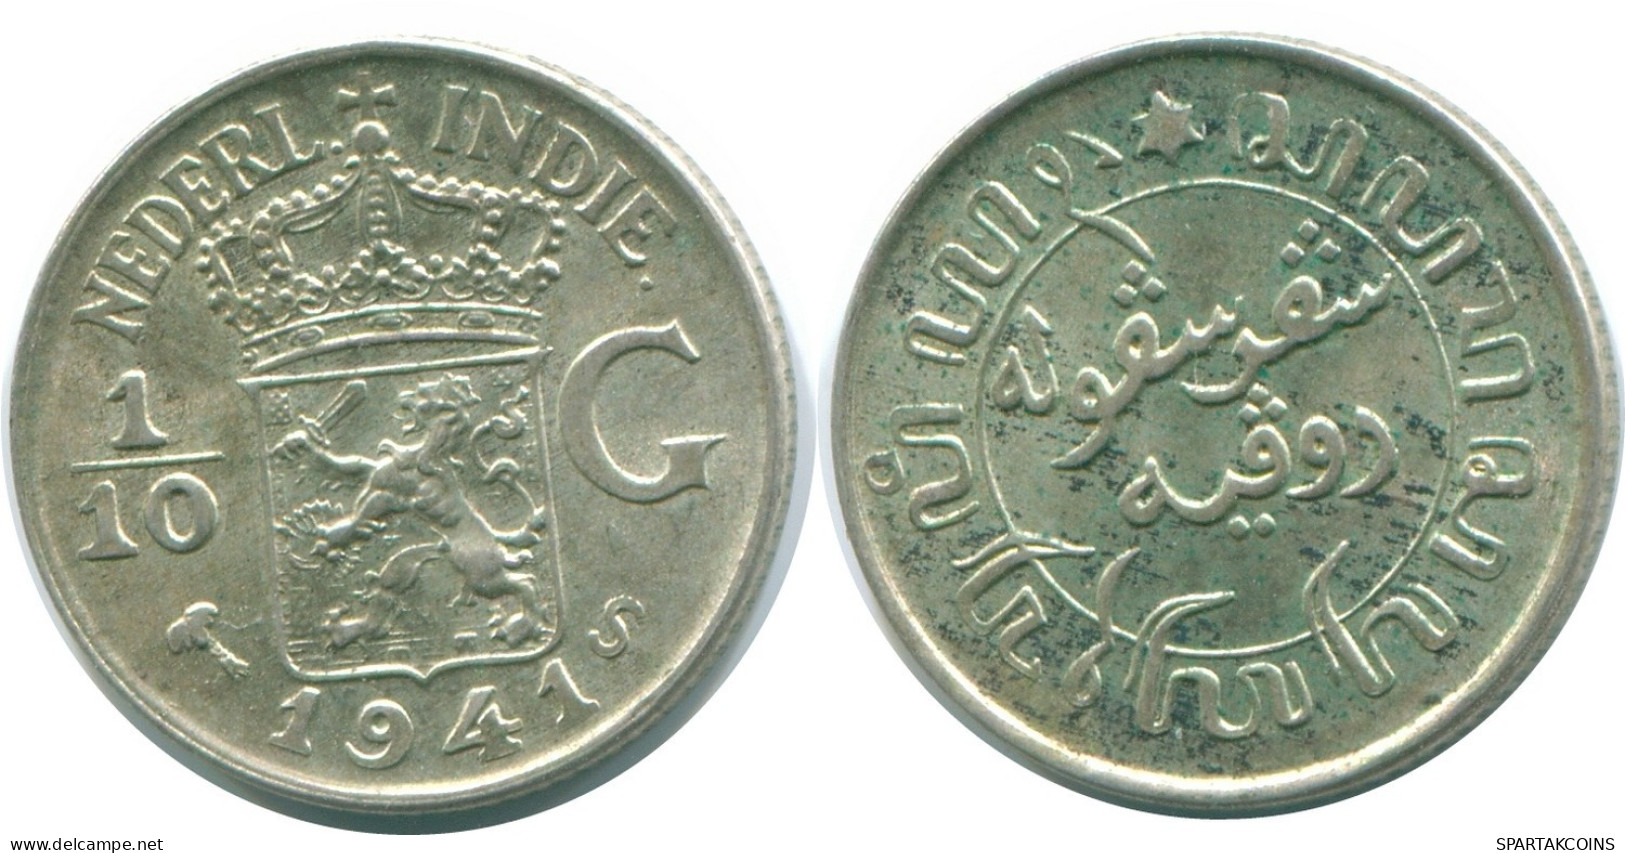 1/10 GULDEN 1941 S NETHERLANDS EAST INDIES SILVER Colonial Coin #NL13577.3.U.A - Indes Neerlandesas